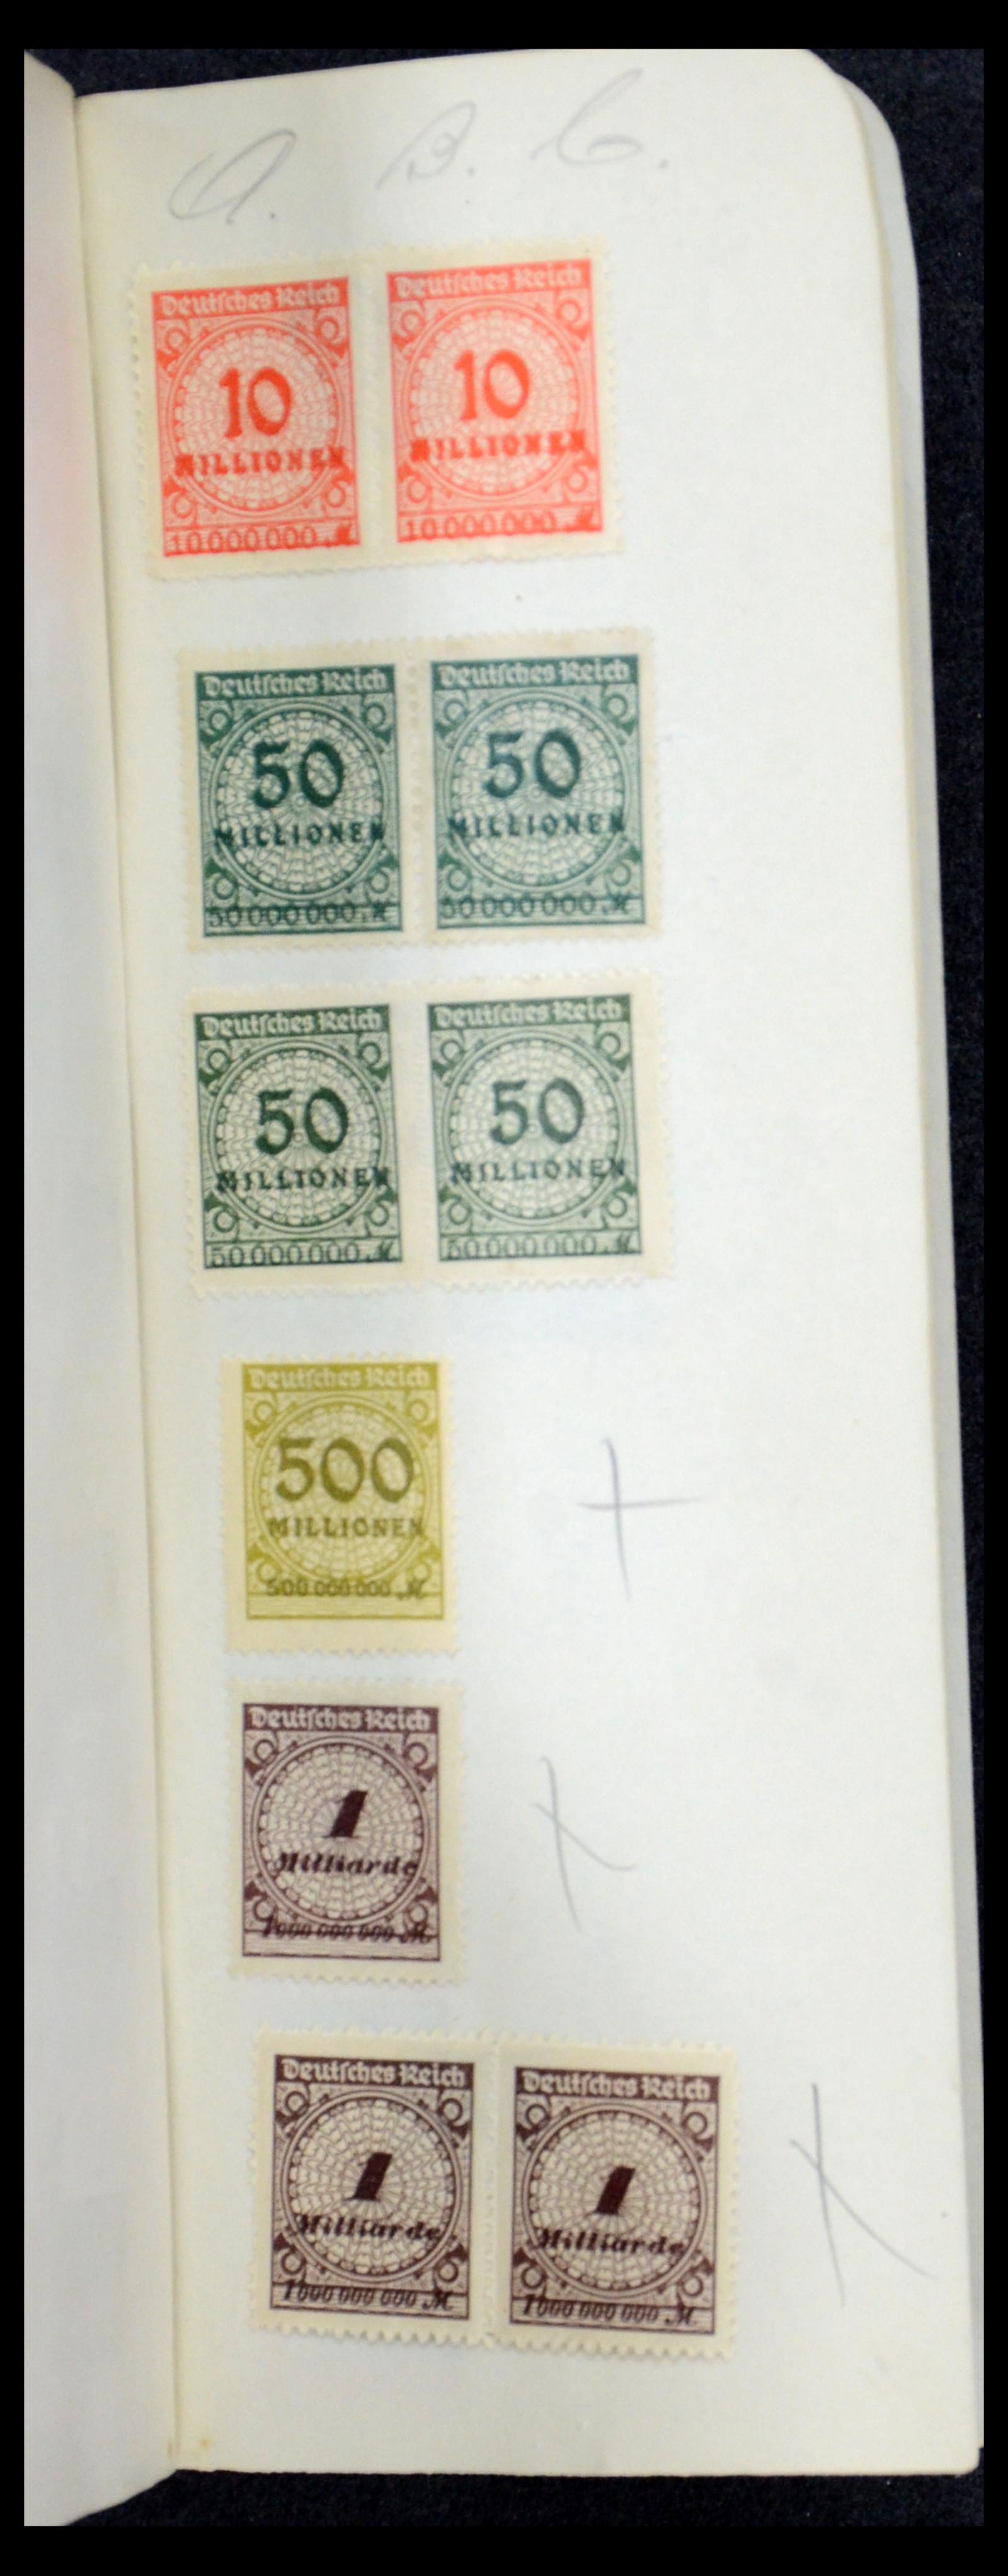 35565 913 - Stamp Collection 35565 German Reich infla 1919-1923.